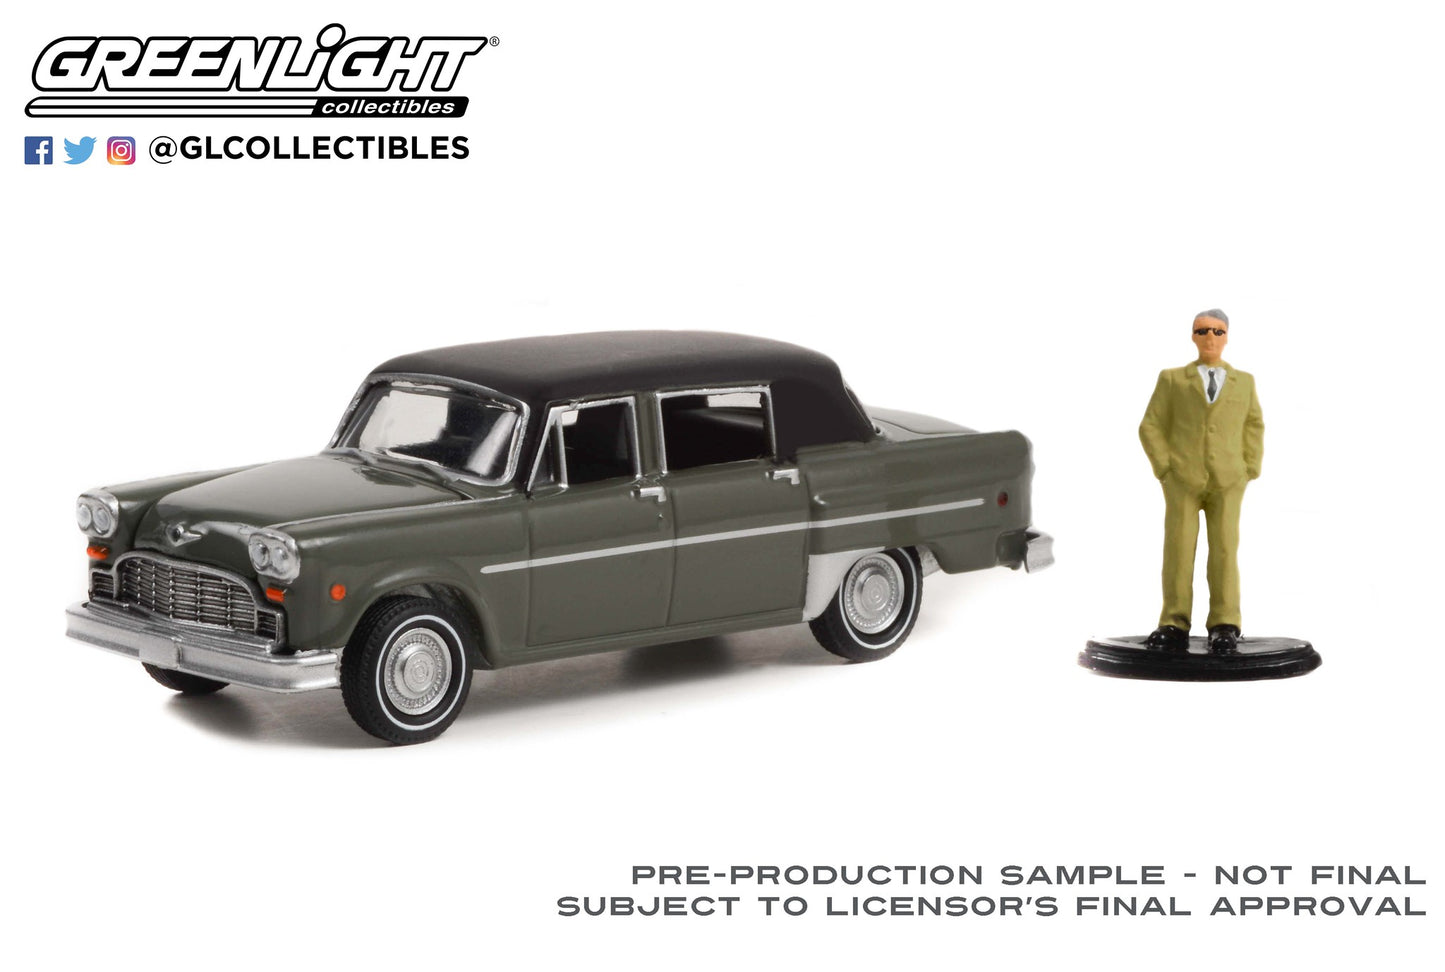 GreenLight 1:64 The Hobby Shop Series 13 - 1982 Checker Marathon A12-E with Driver in Suit 97130-C